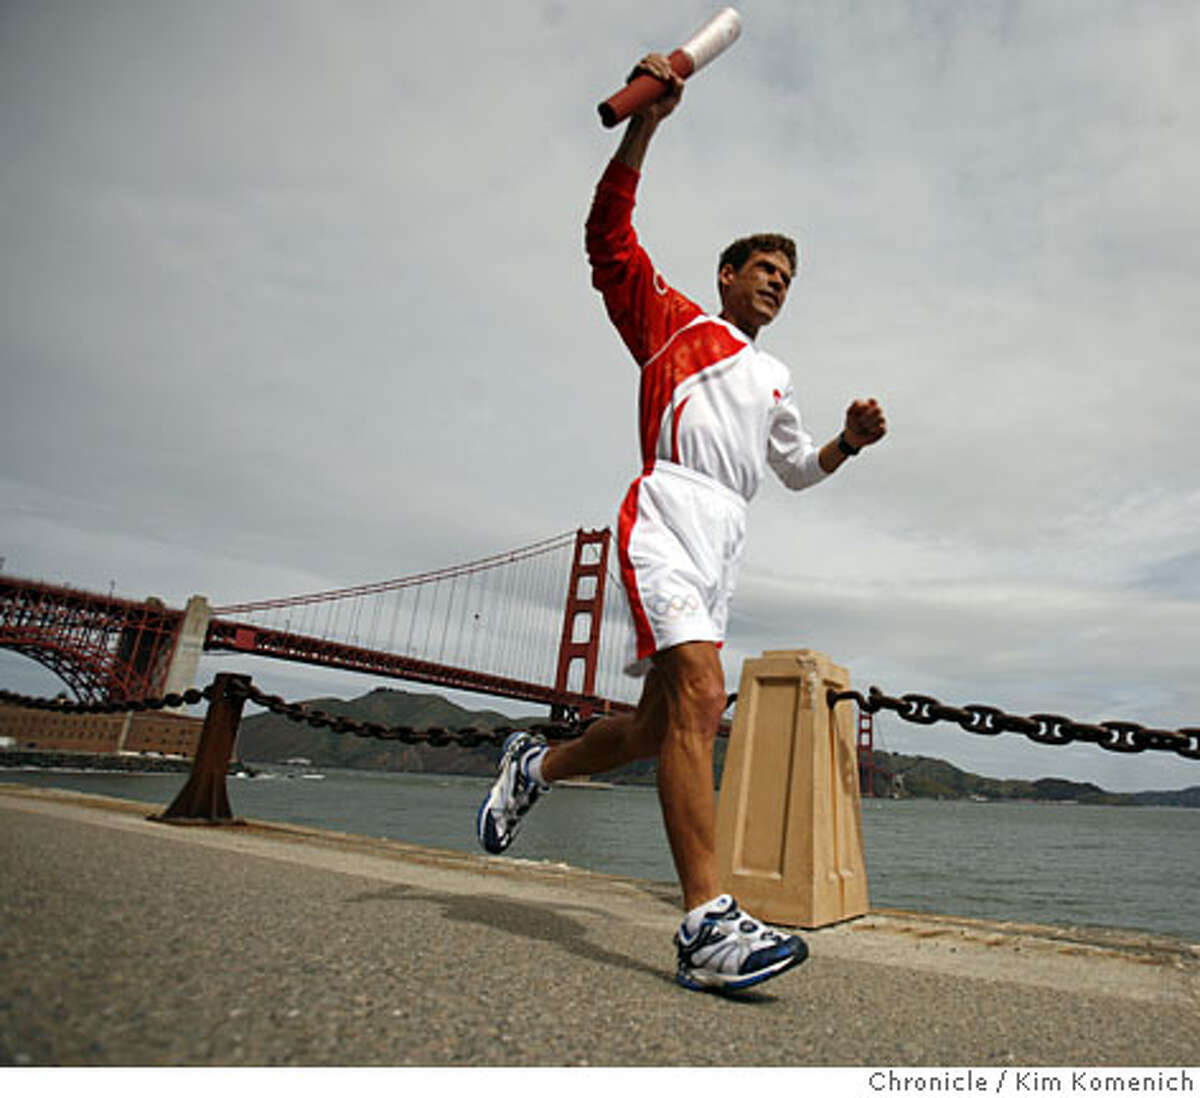 Olympic torchbearer Dean Karnazes, 44, of San Francisco participates in a photo-op for the San Francisco leg of the Olypic torch run near Fort Point in San Francisco, Calif., on April 8, 2008 Photo by Kim Komenich / San Francisco Chronicle